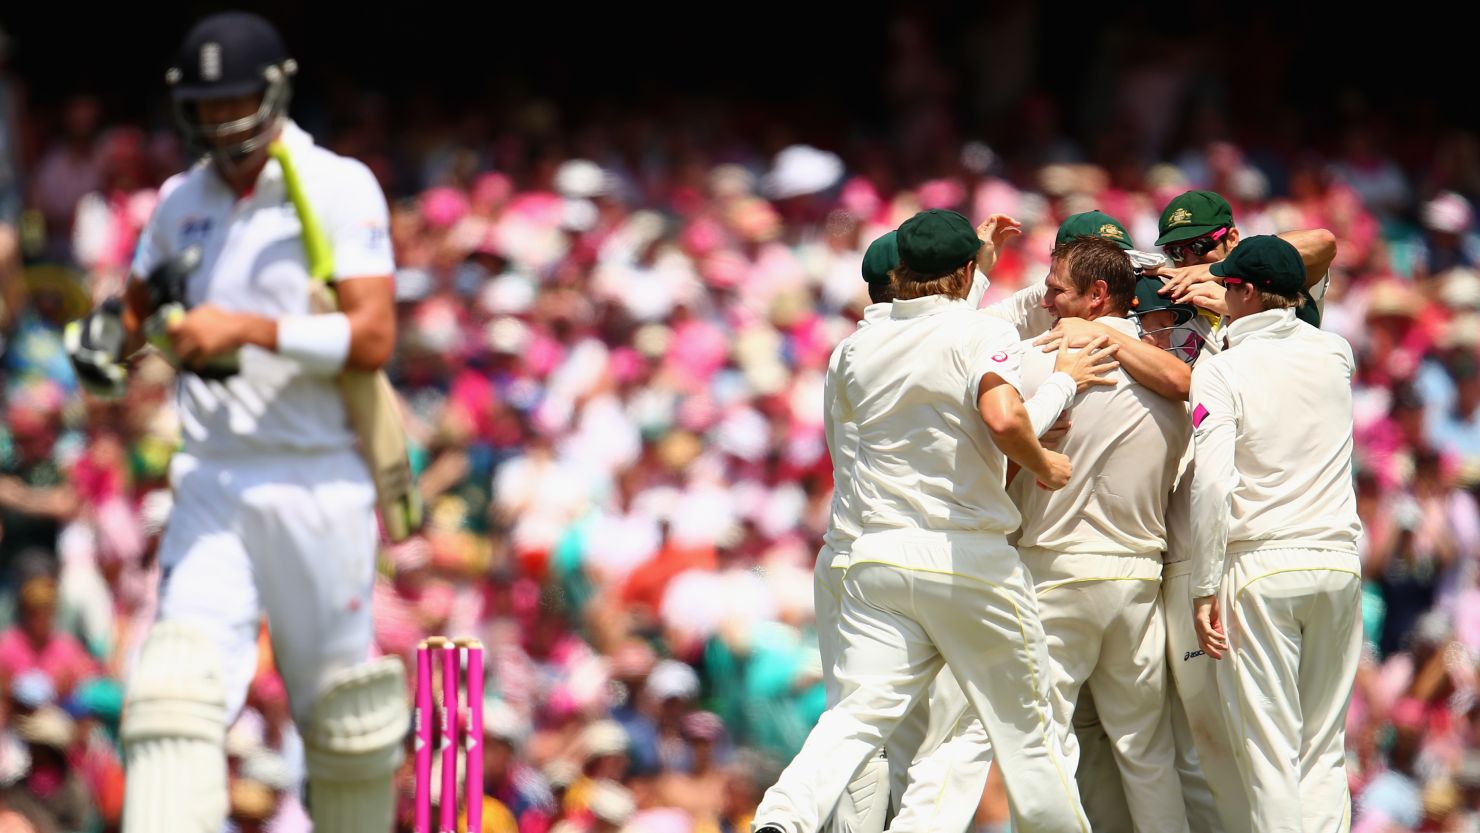 Australia did a lot of celebrating during the Ashes cricket series, beating England 5-0. 